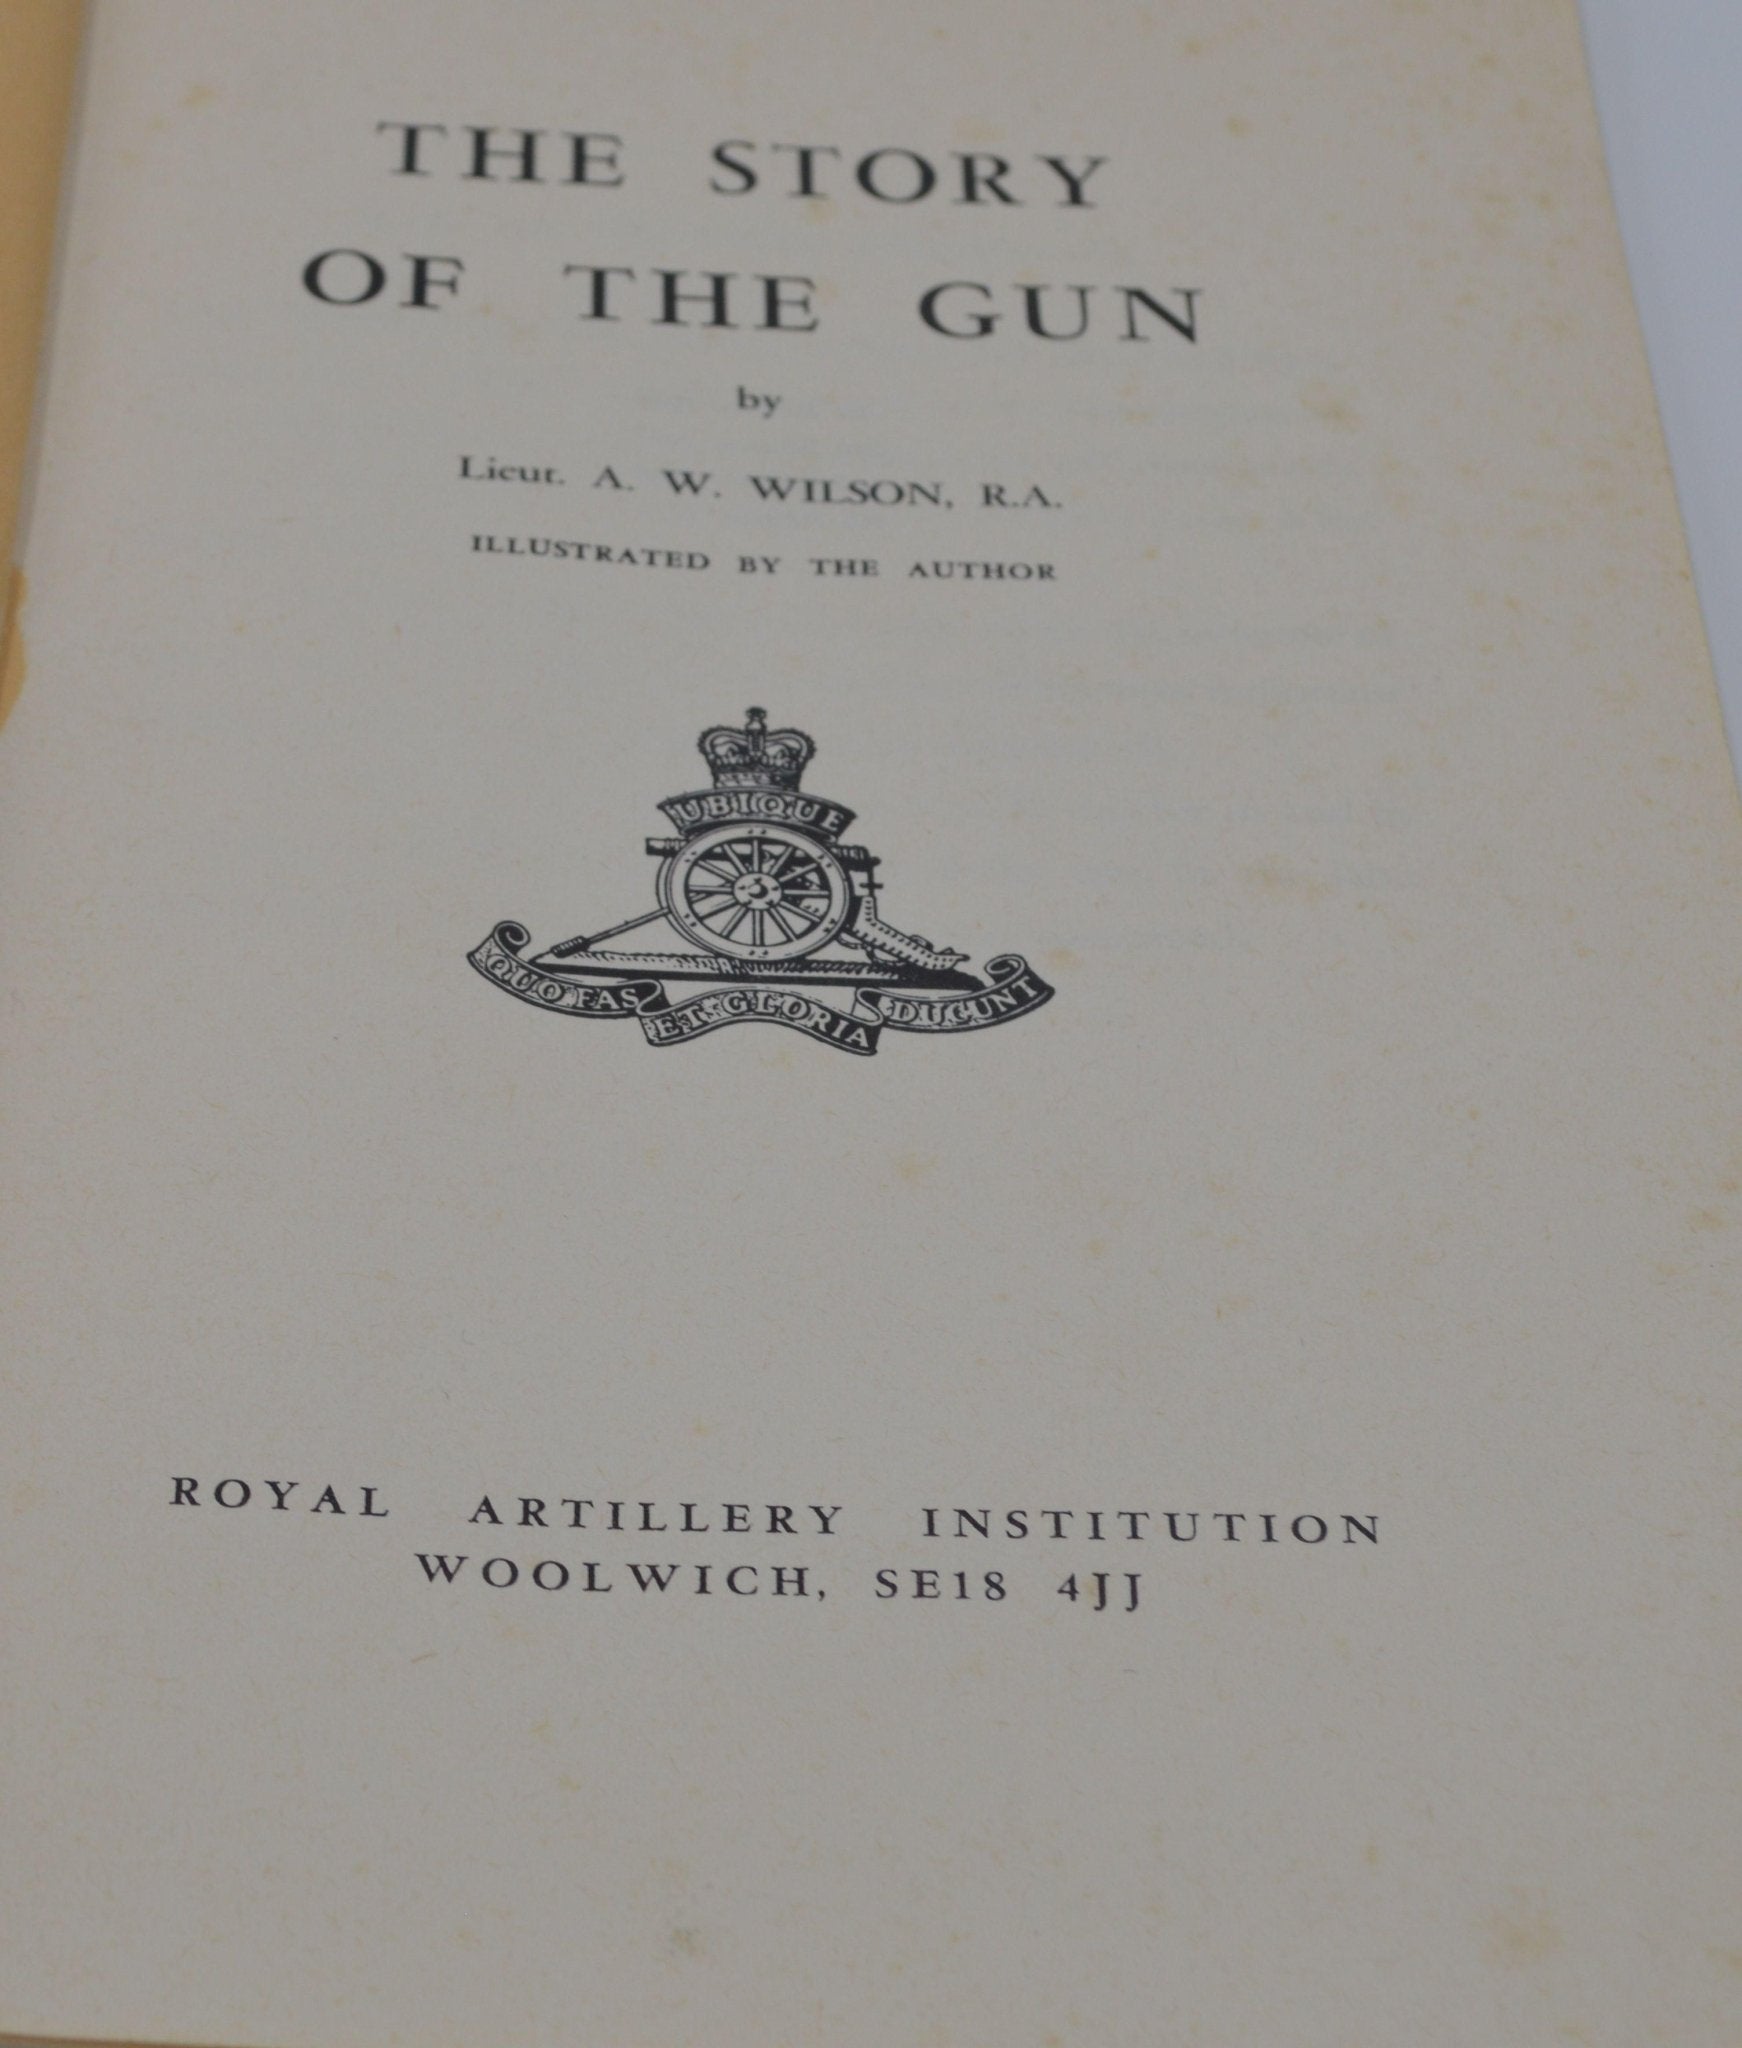 SECONDHAND BOOK THE STORY OF THE GUN by LT.A.W.WILSON.R.A - TMD167207